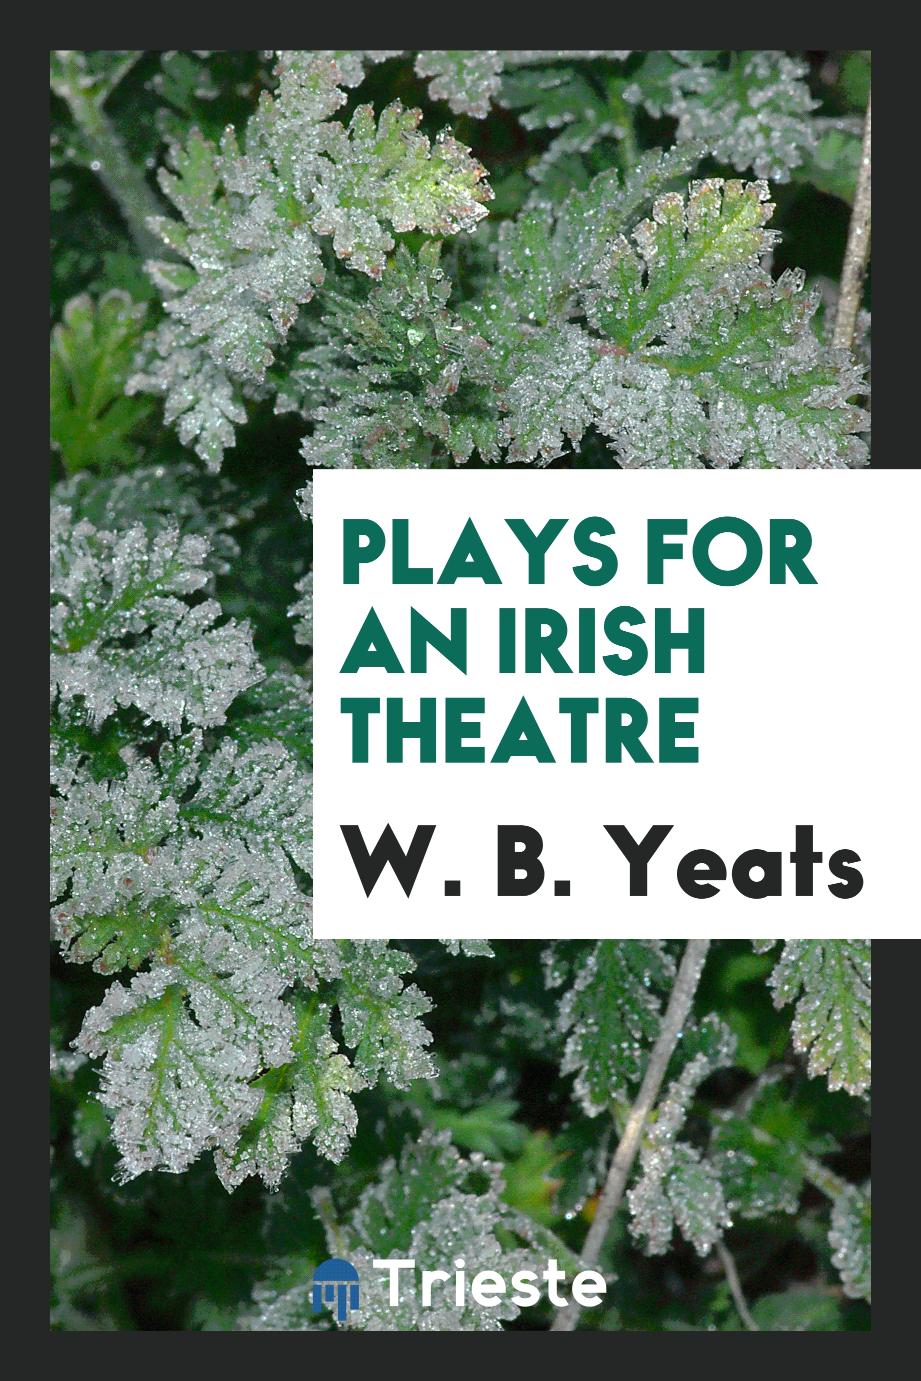 Plays for an Irish theatre